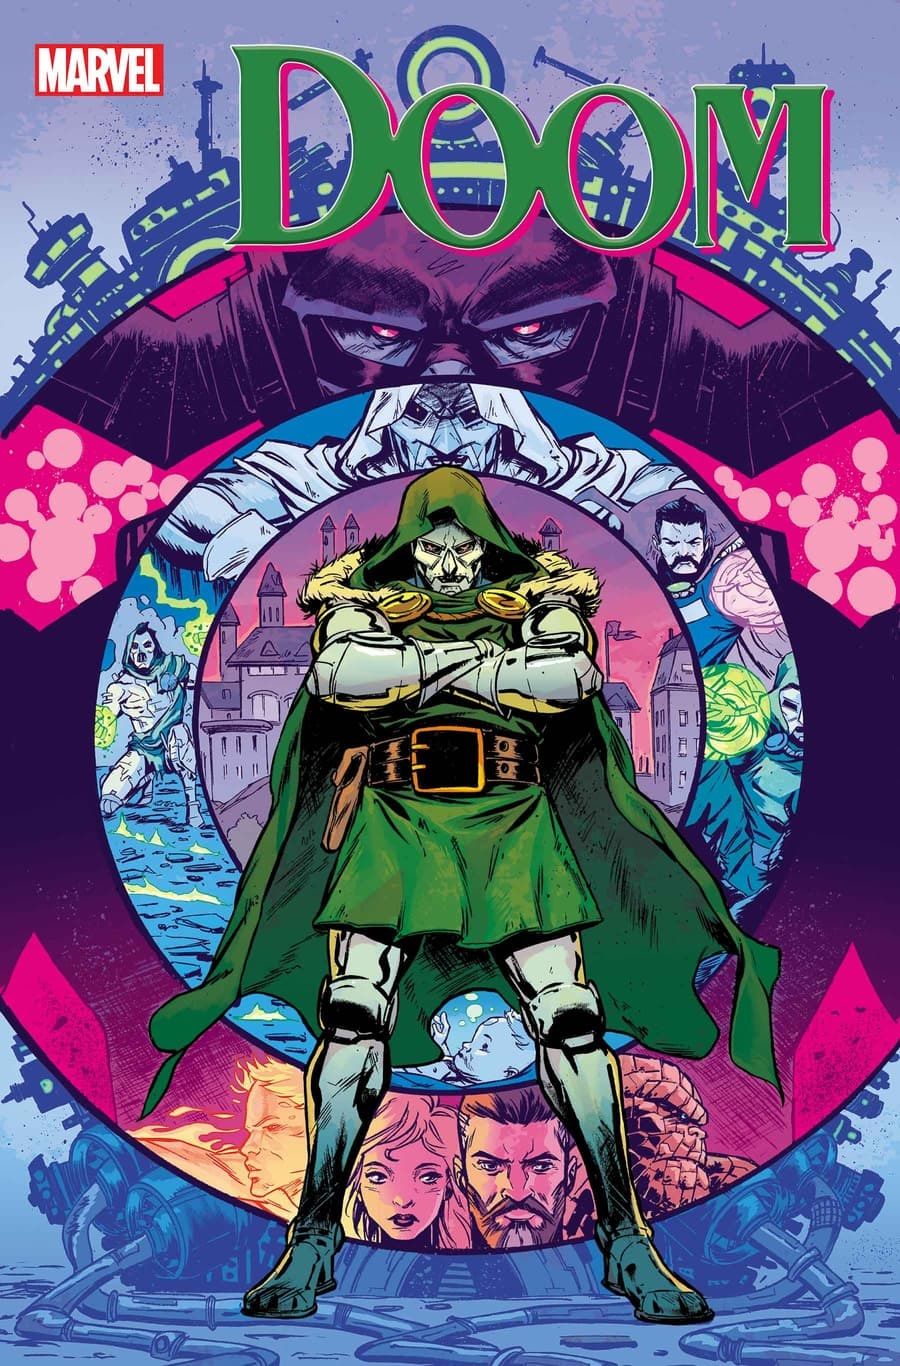 The cover of Doom #1